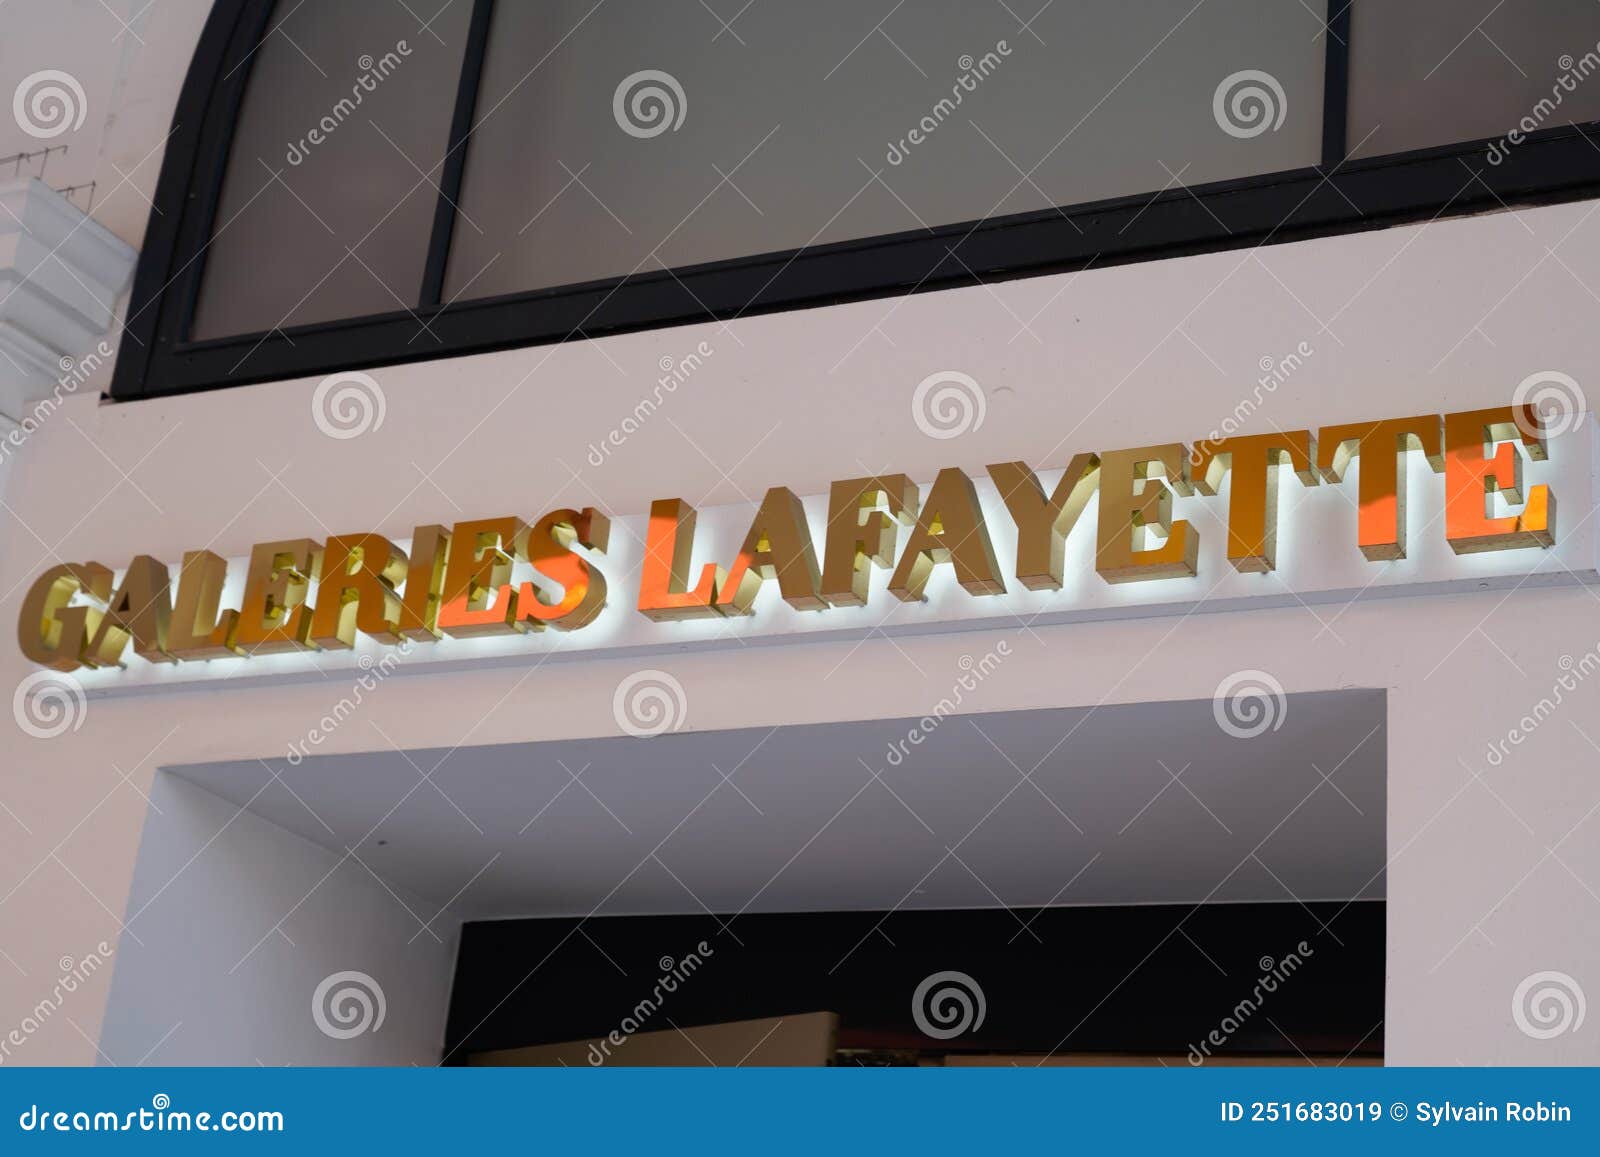 Galeries Lafayette Logo Brand and Text Sign Shop Entrance Facade City ...